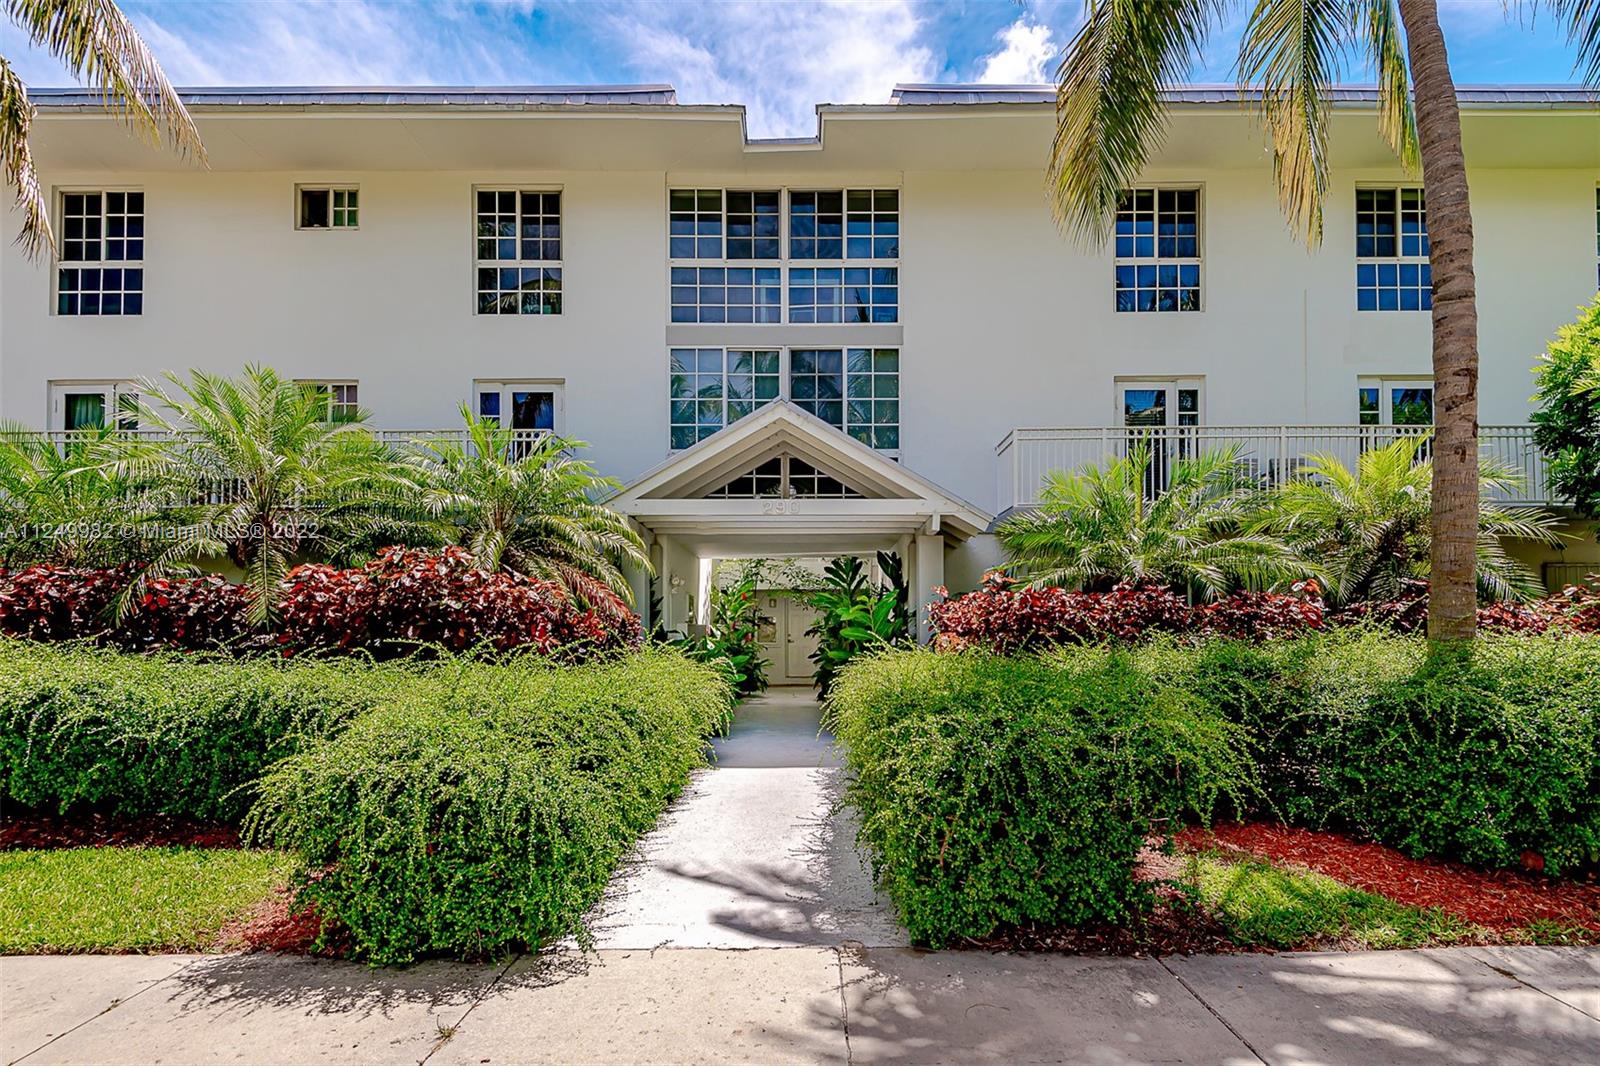 Bright and spacious  unfurnished 1/1 at a boutique building, key Islander in Key Biscayne. Close to schools,restaurants and shops. Amenities include a pool, beach club membership,private beach access. Just renovated, new all white paint and cabinets. One parking space.Big balcony